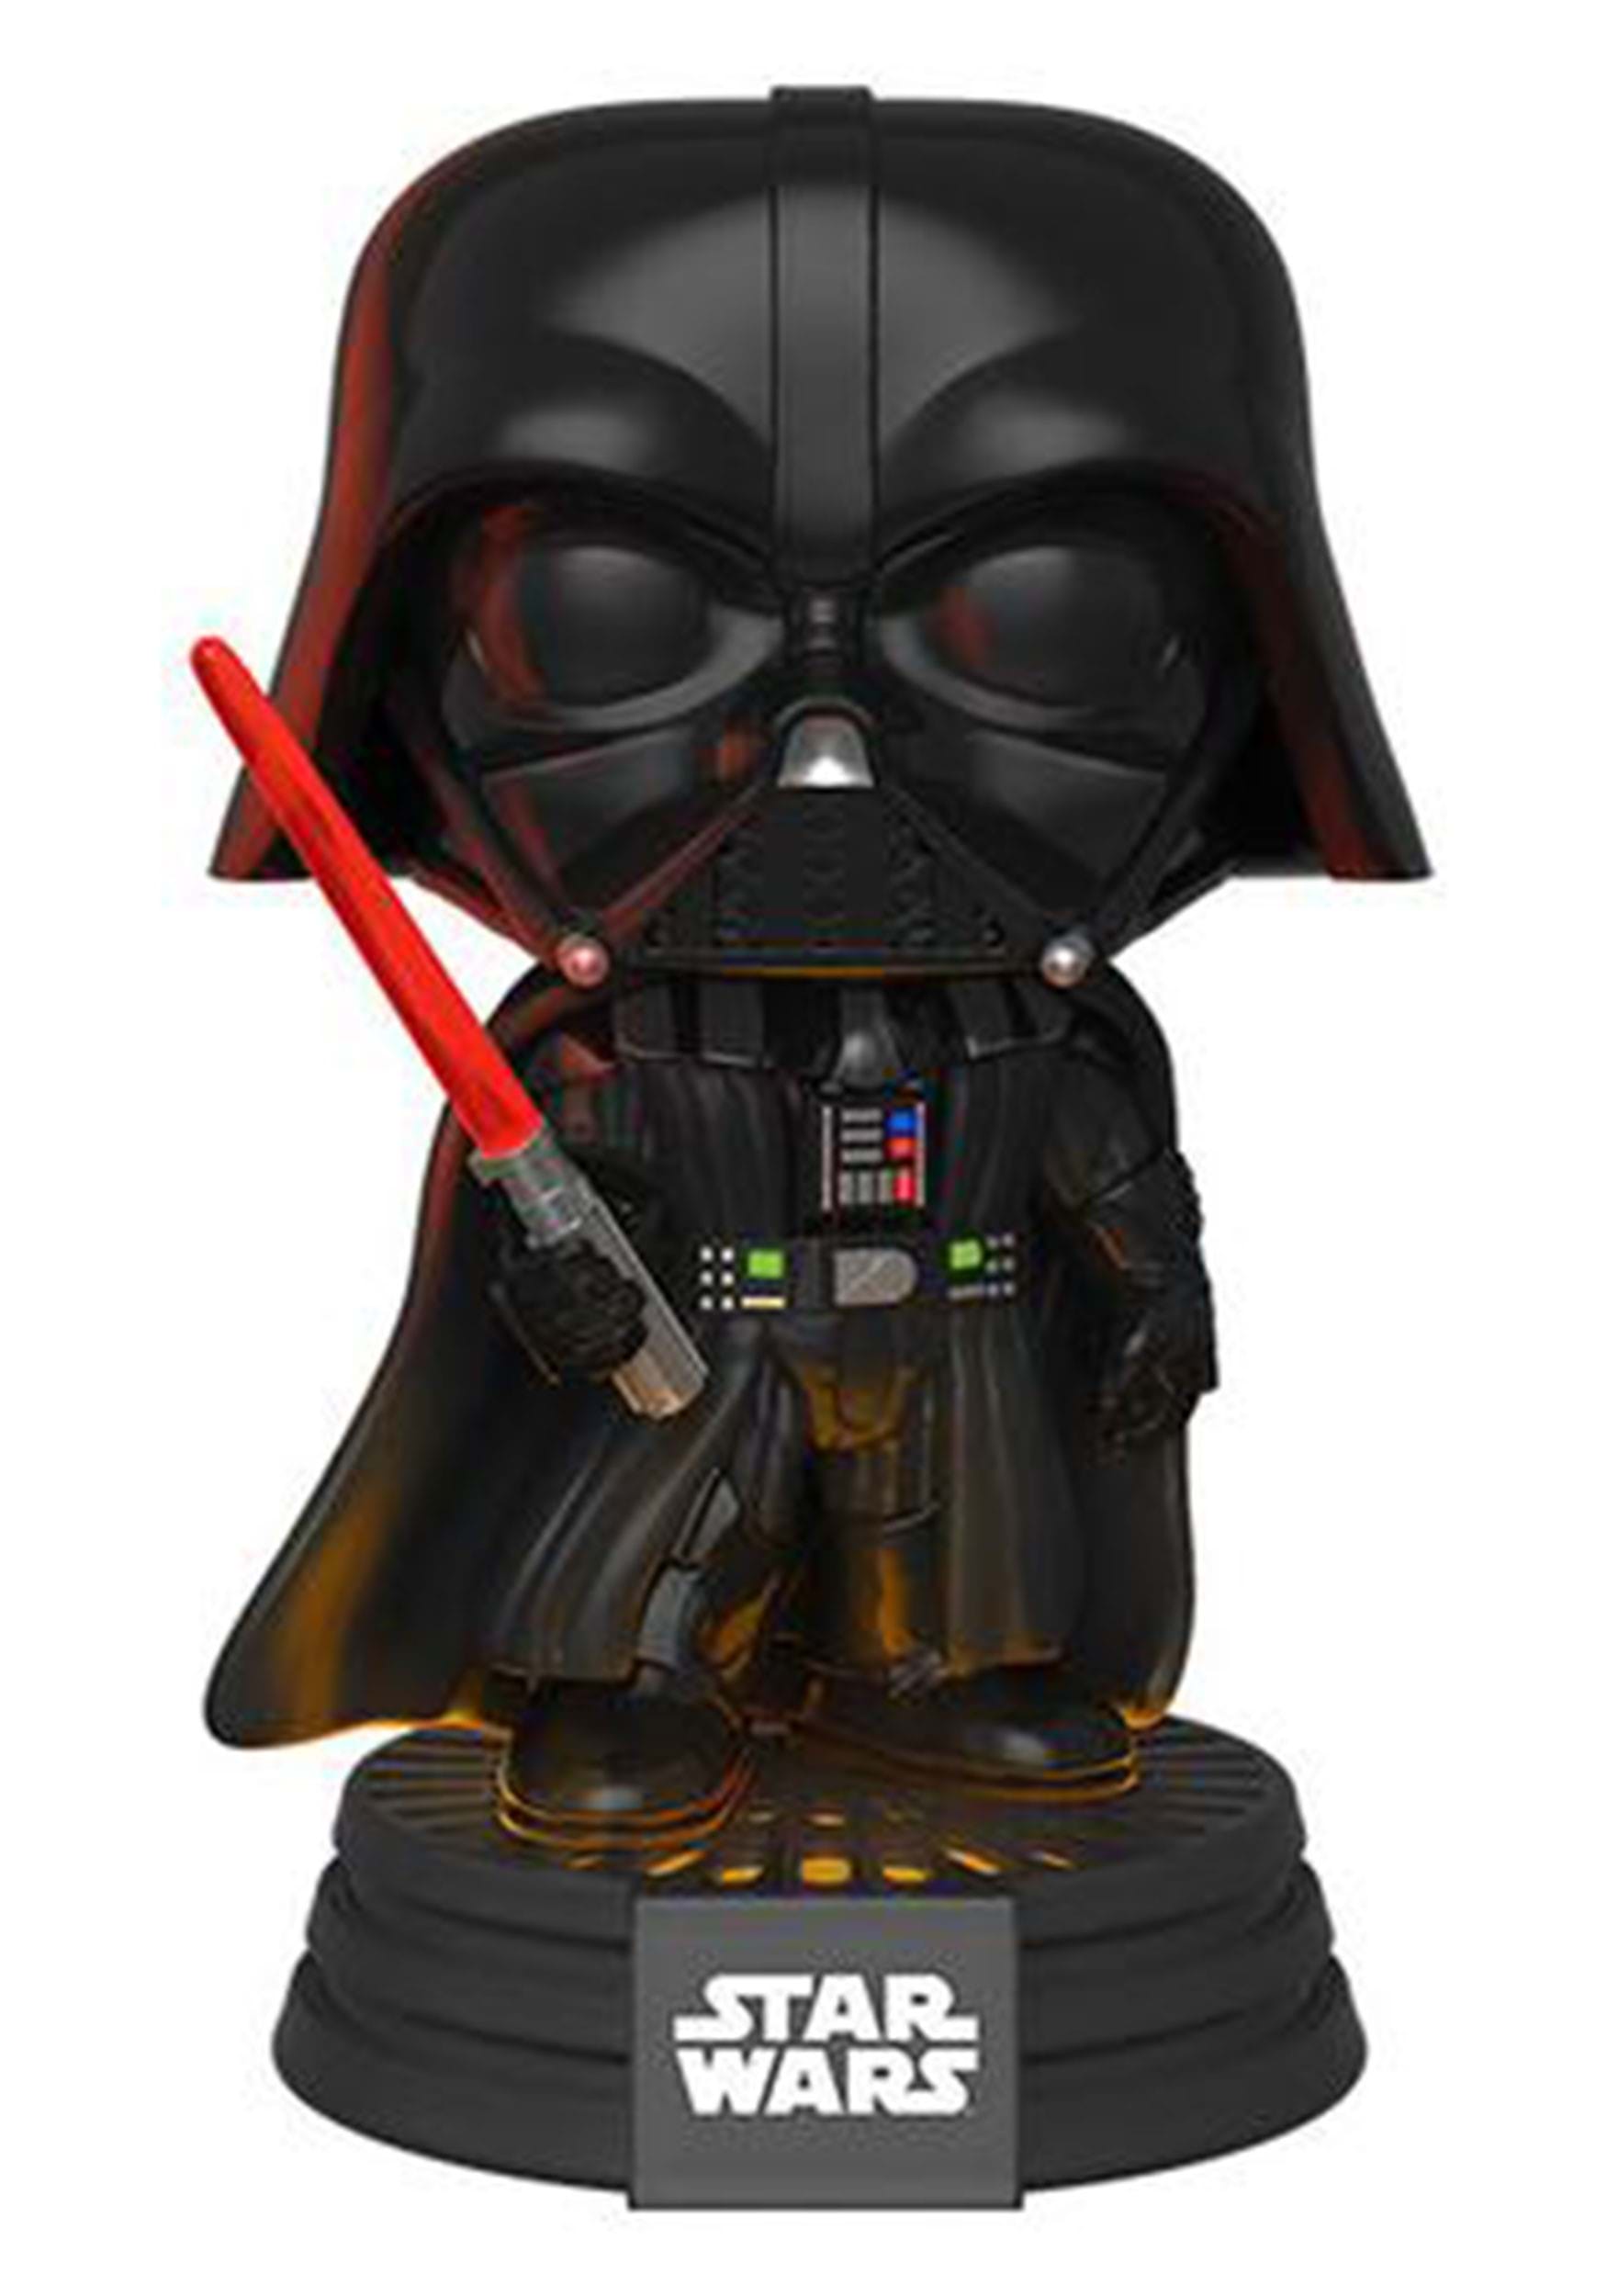 Funko POP! Star Wars Darth Vader Electronic Lights and Sound